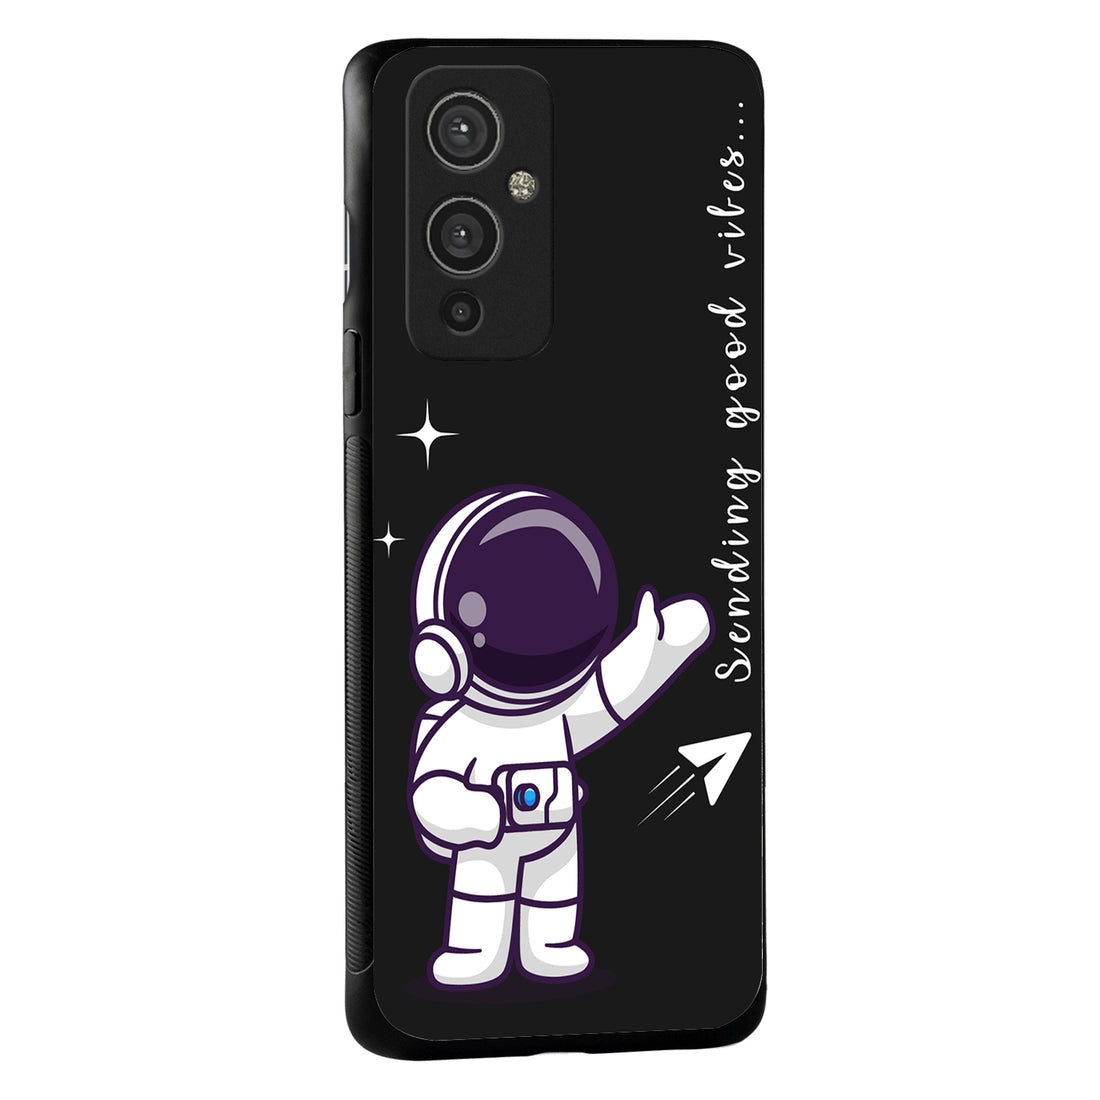 Spending Good Vibes Bff Oneplus 9 Back Case